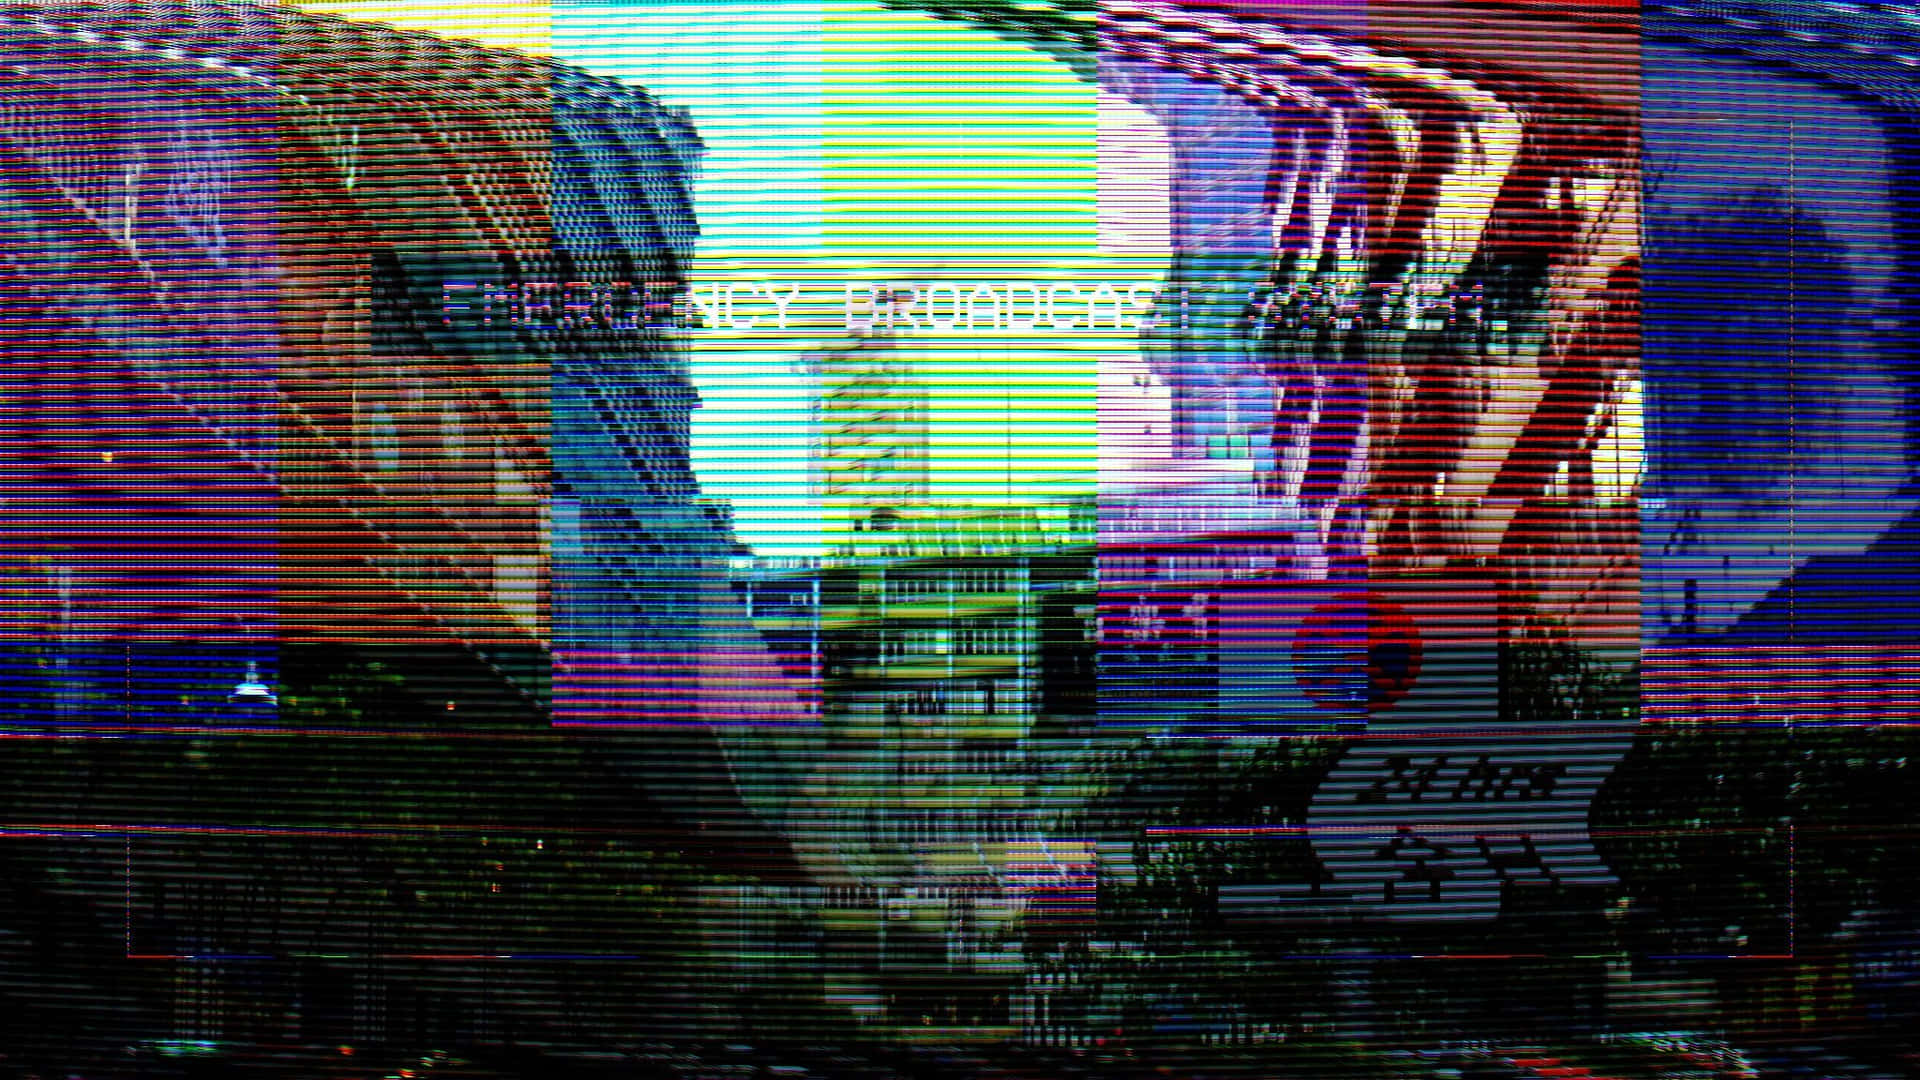 A Colorful Screen With A City View